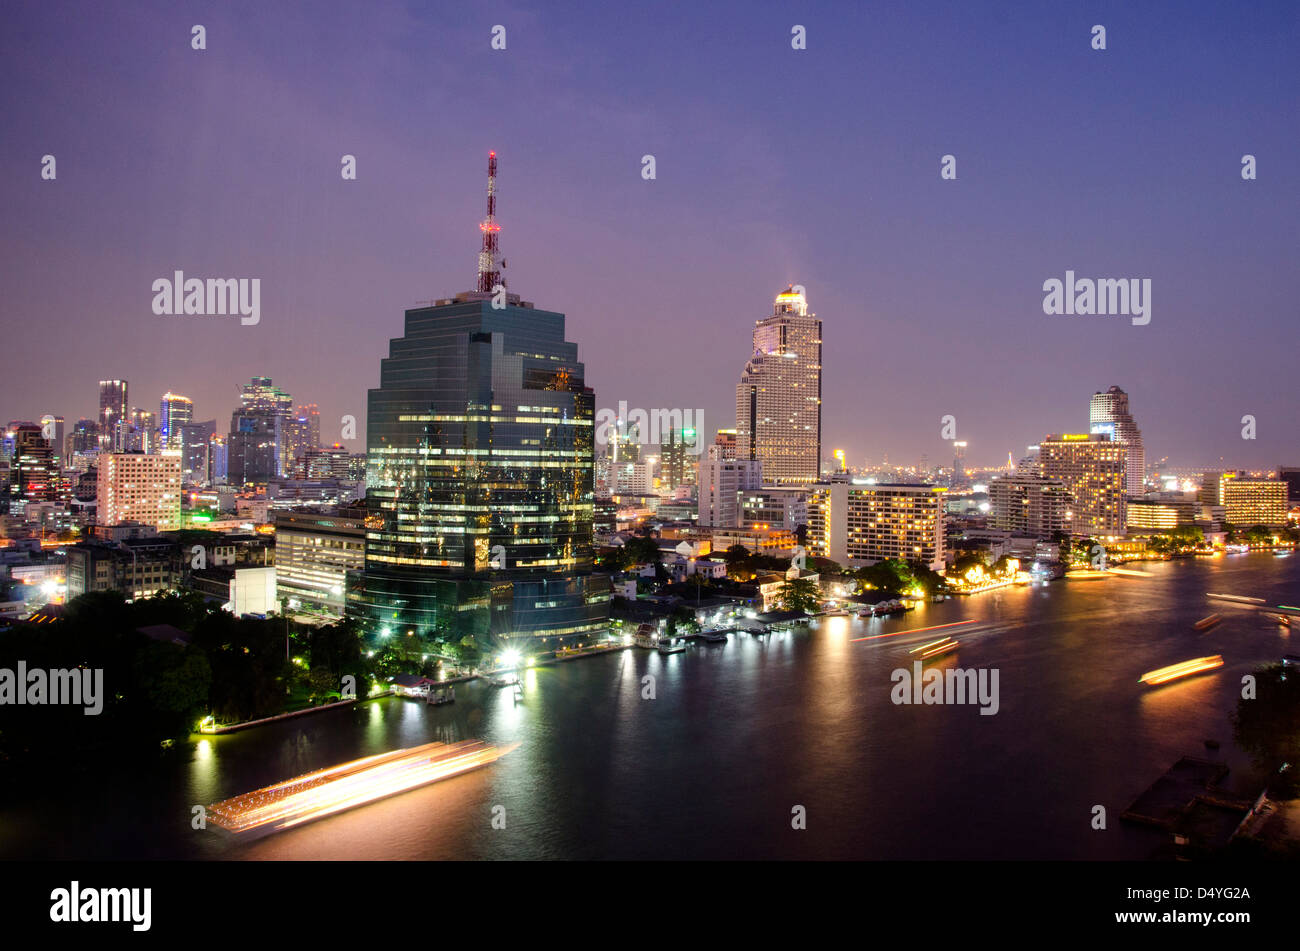 Thailand, Bangkok. Downtown Bangkok, evening skyline view of the Chao Phraya river waterfront with lighted boats. Stock Photo